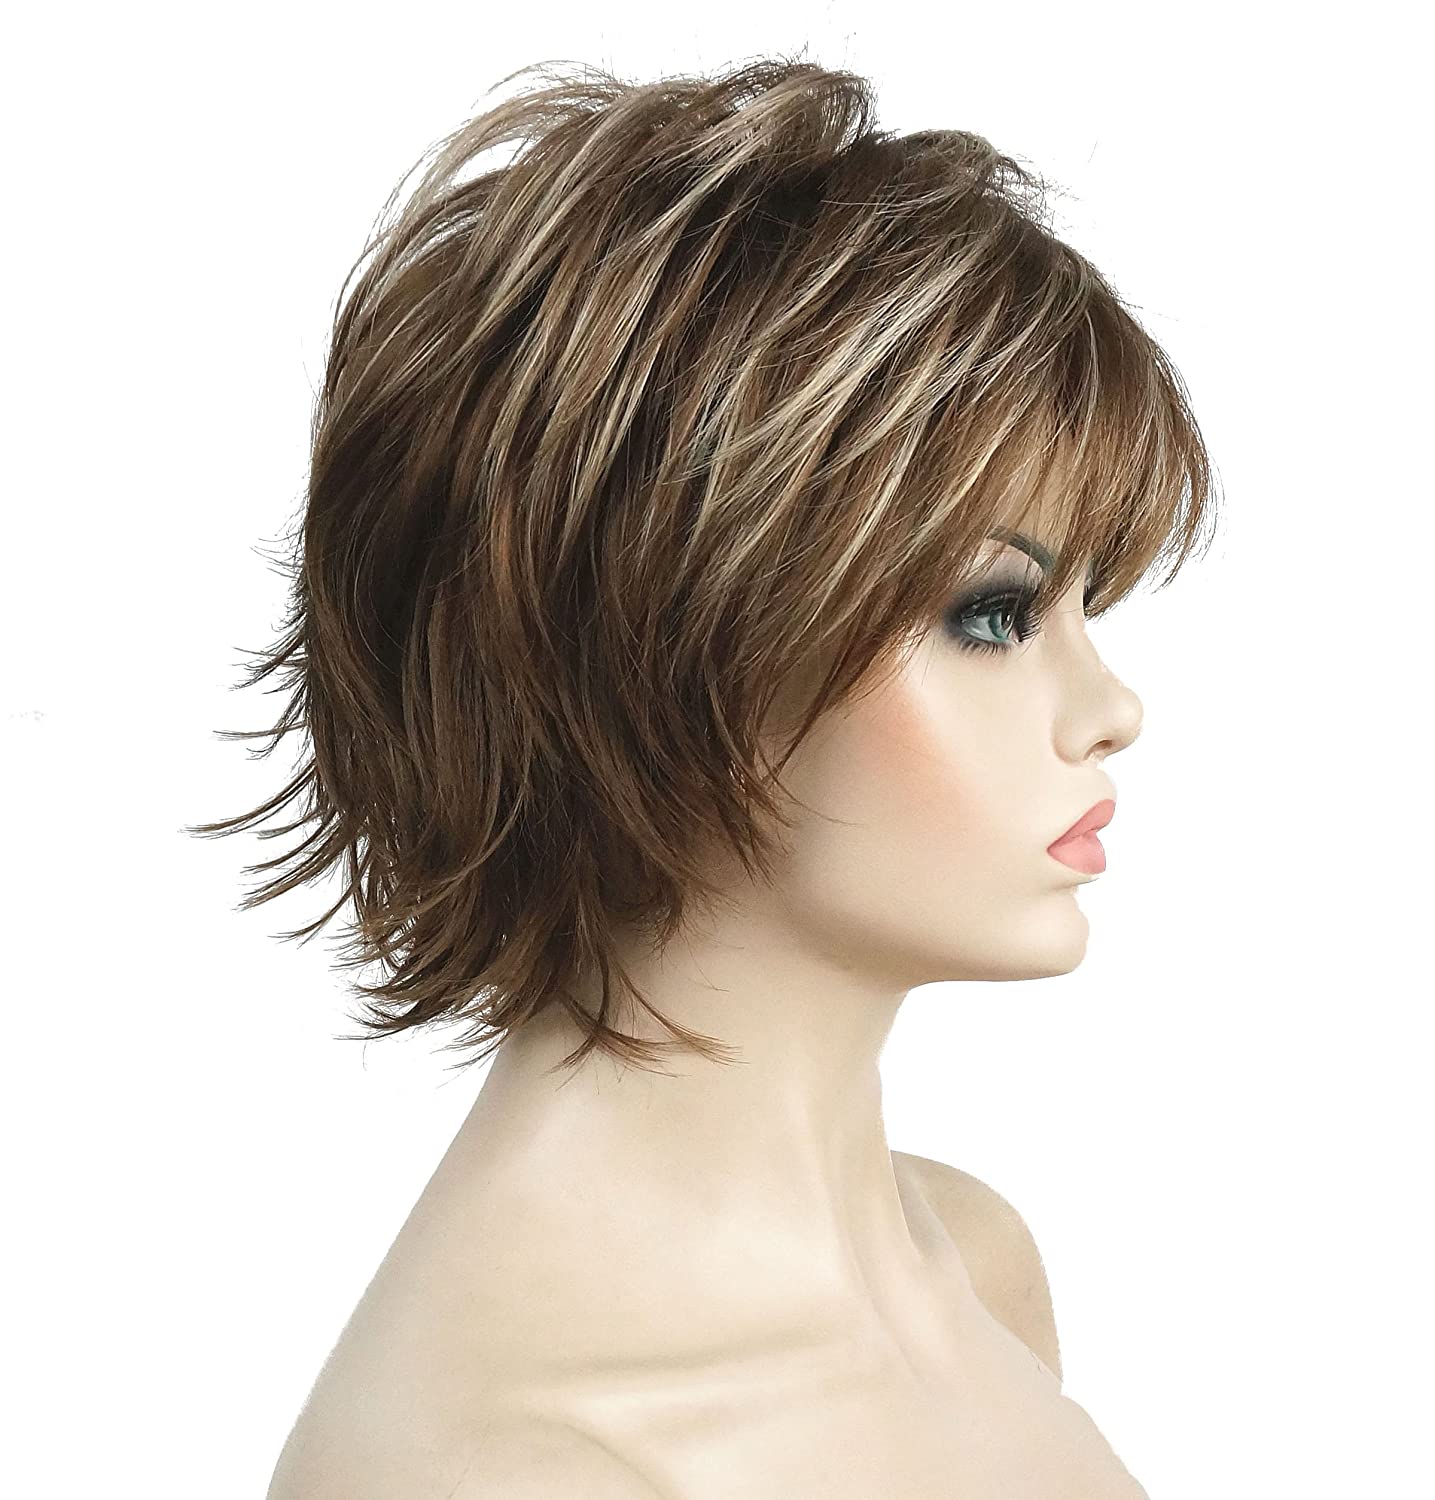 Price:$20.99    Lydell Short Layered Shaggy Full Synthetic Wig Wigs 12TT26 Brown Highlights  Beauty